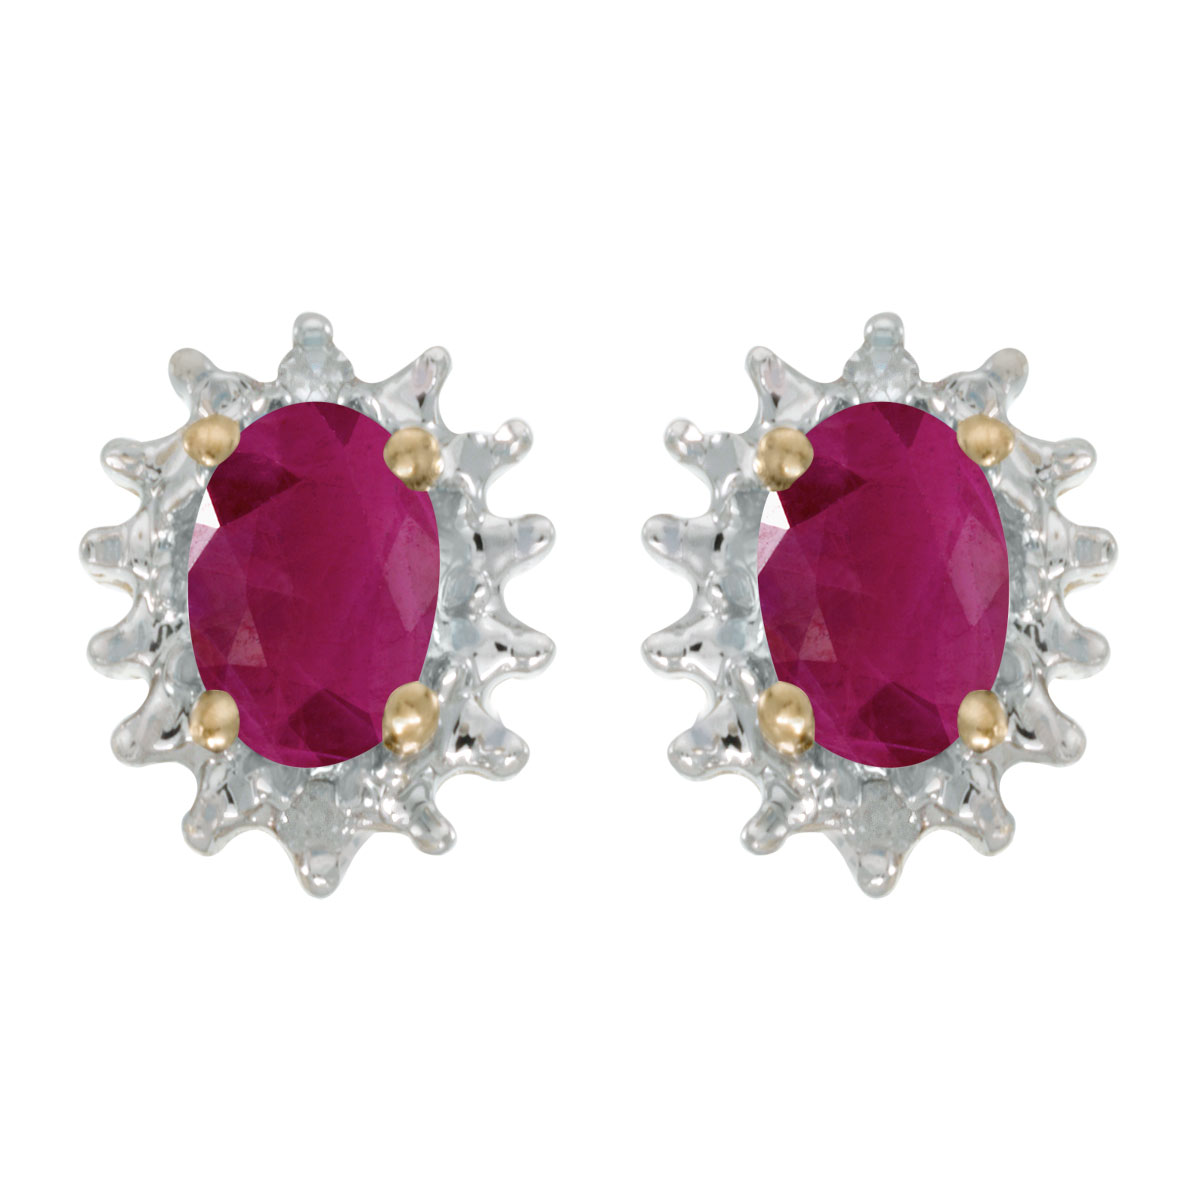 JCX1994: These 14k yellow gold oval ruby and diamond earrings feature 6x4 mm genuine natural rubys with a 0.72 ct total weight and .04 ct diamonds.